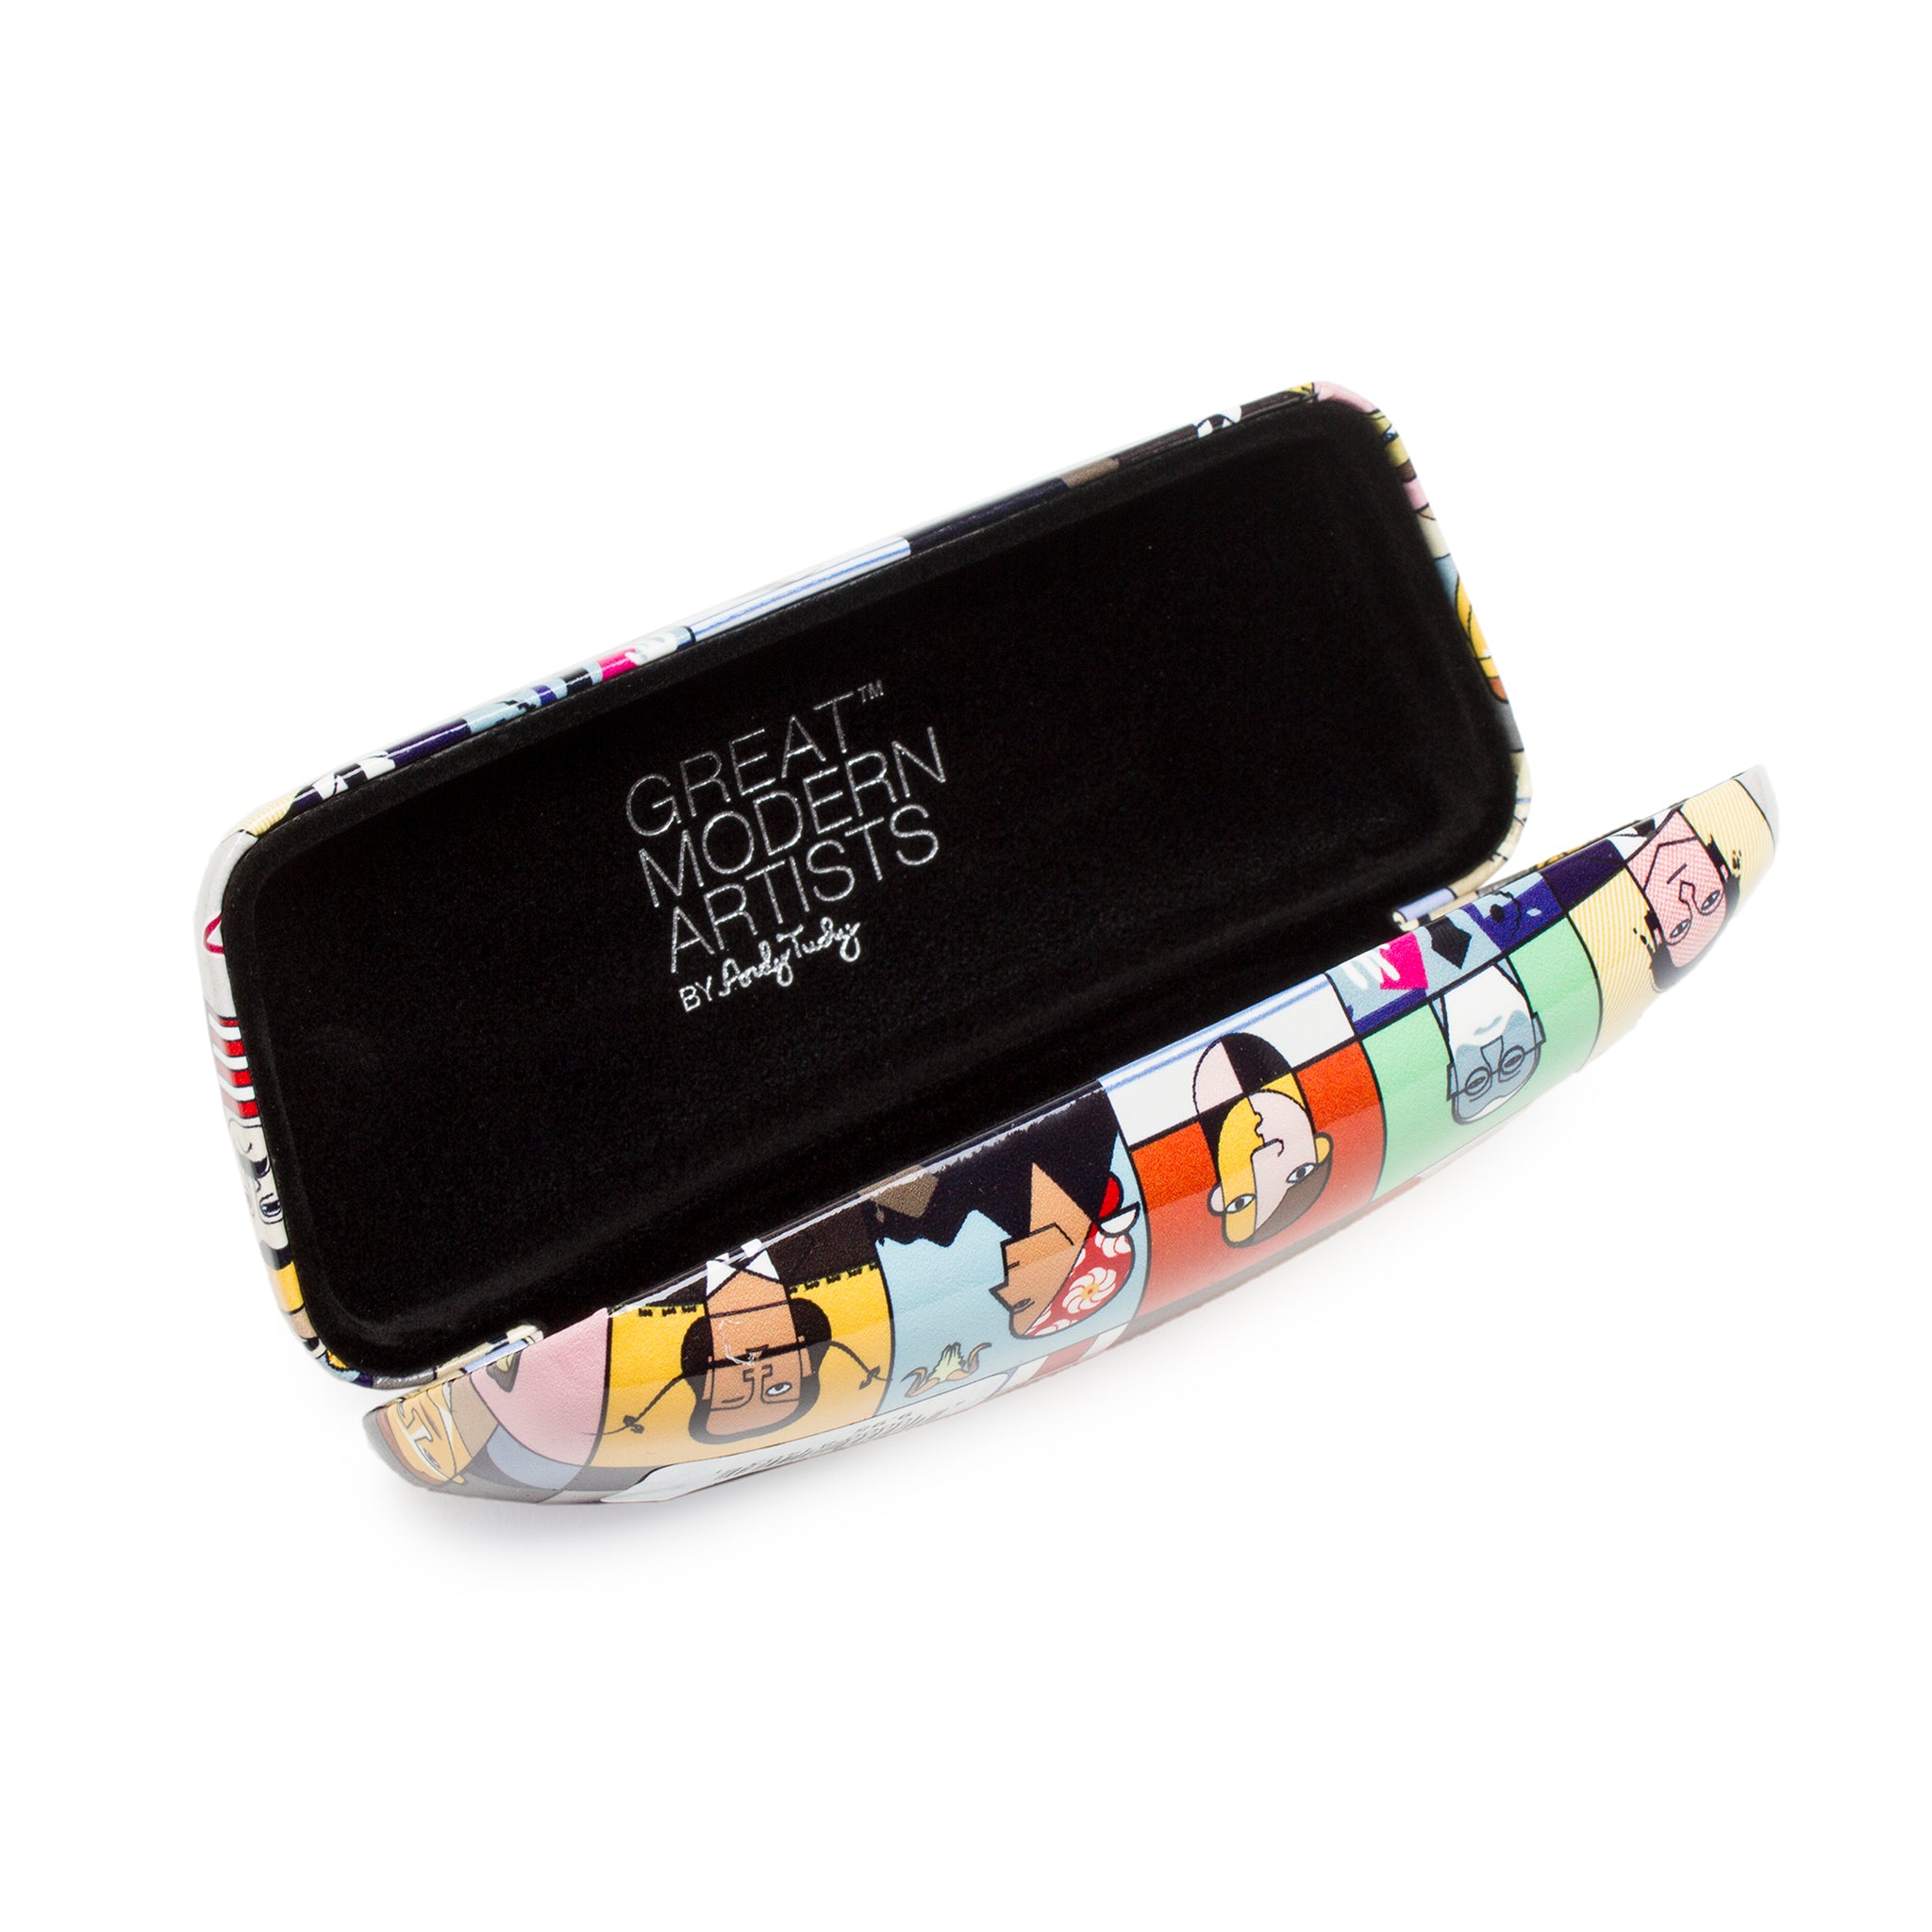 Hand Painted Eyeglass Case  Eyeglass case, Tole painting patterns